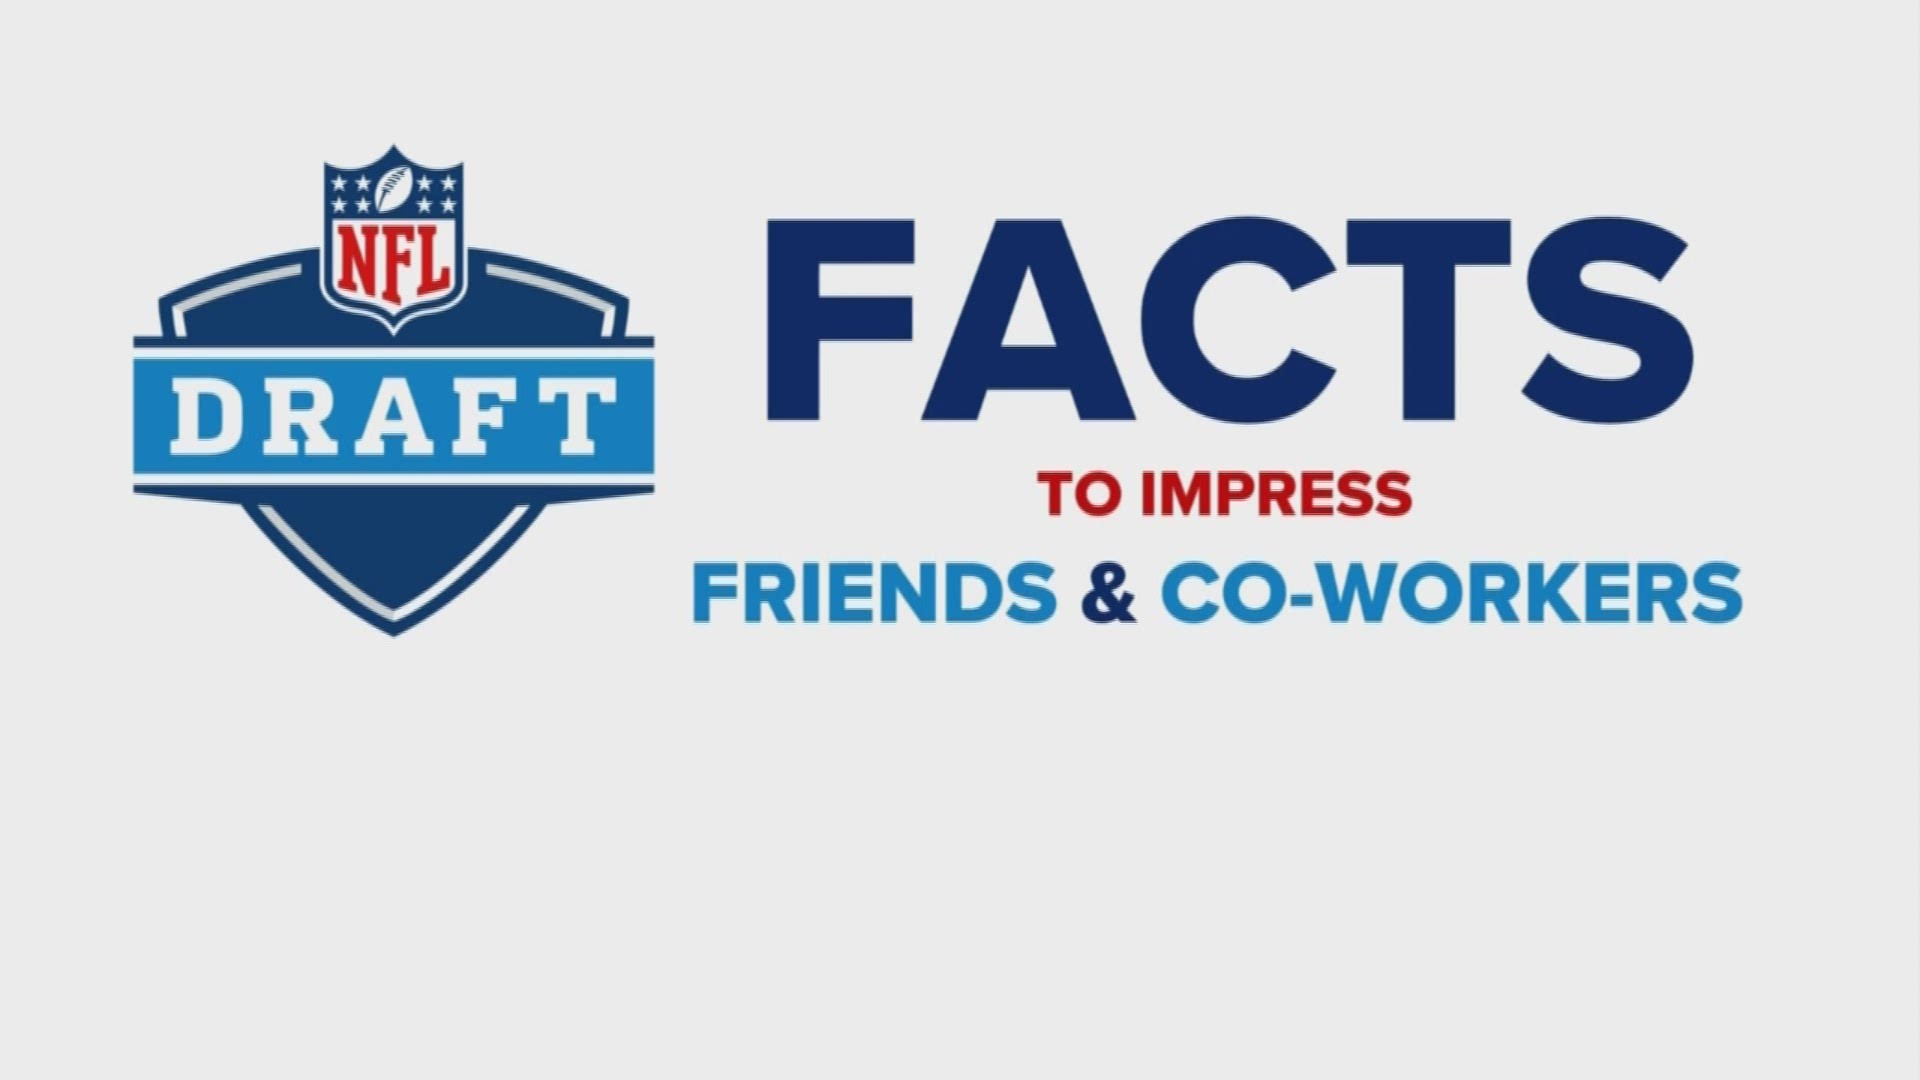 The 2019 NFL Draft is Thursday. Here are a few facts to impress your friends and co-workers.